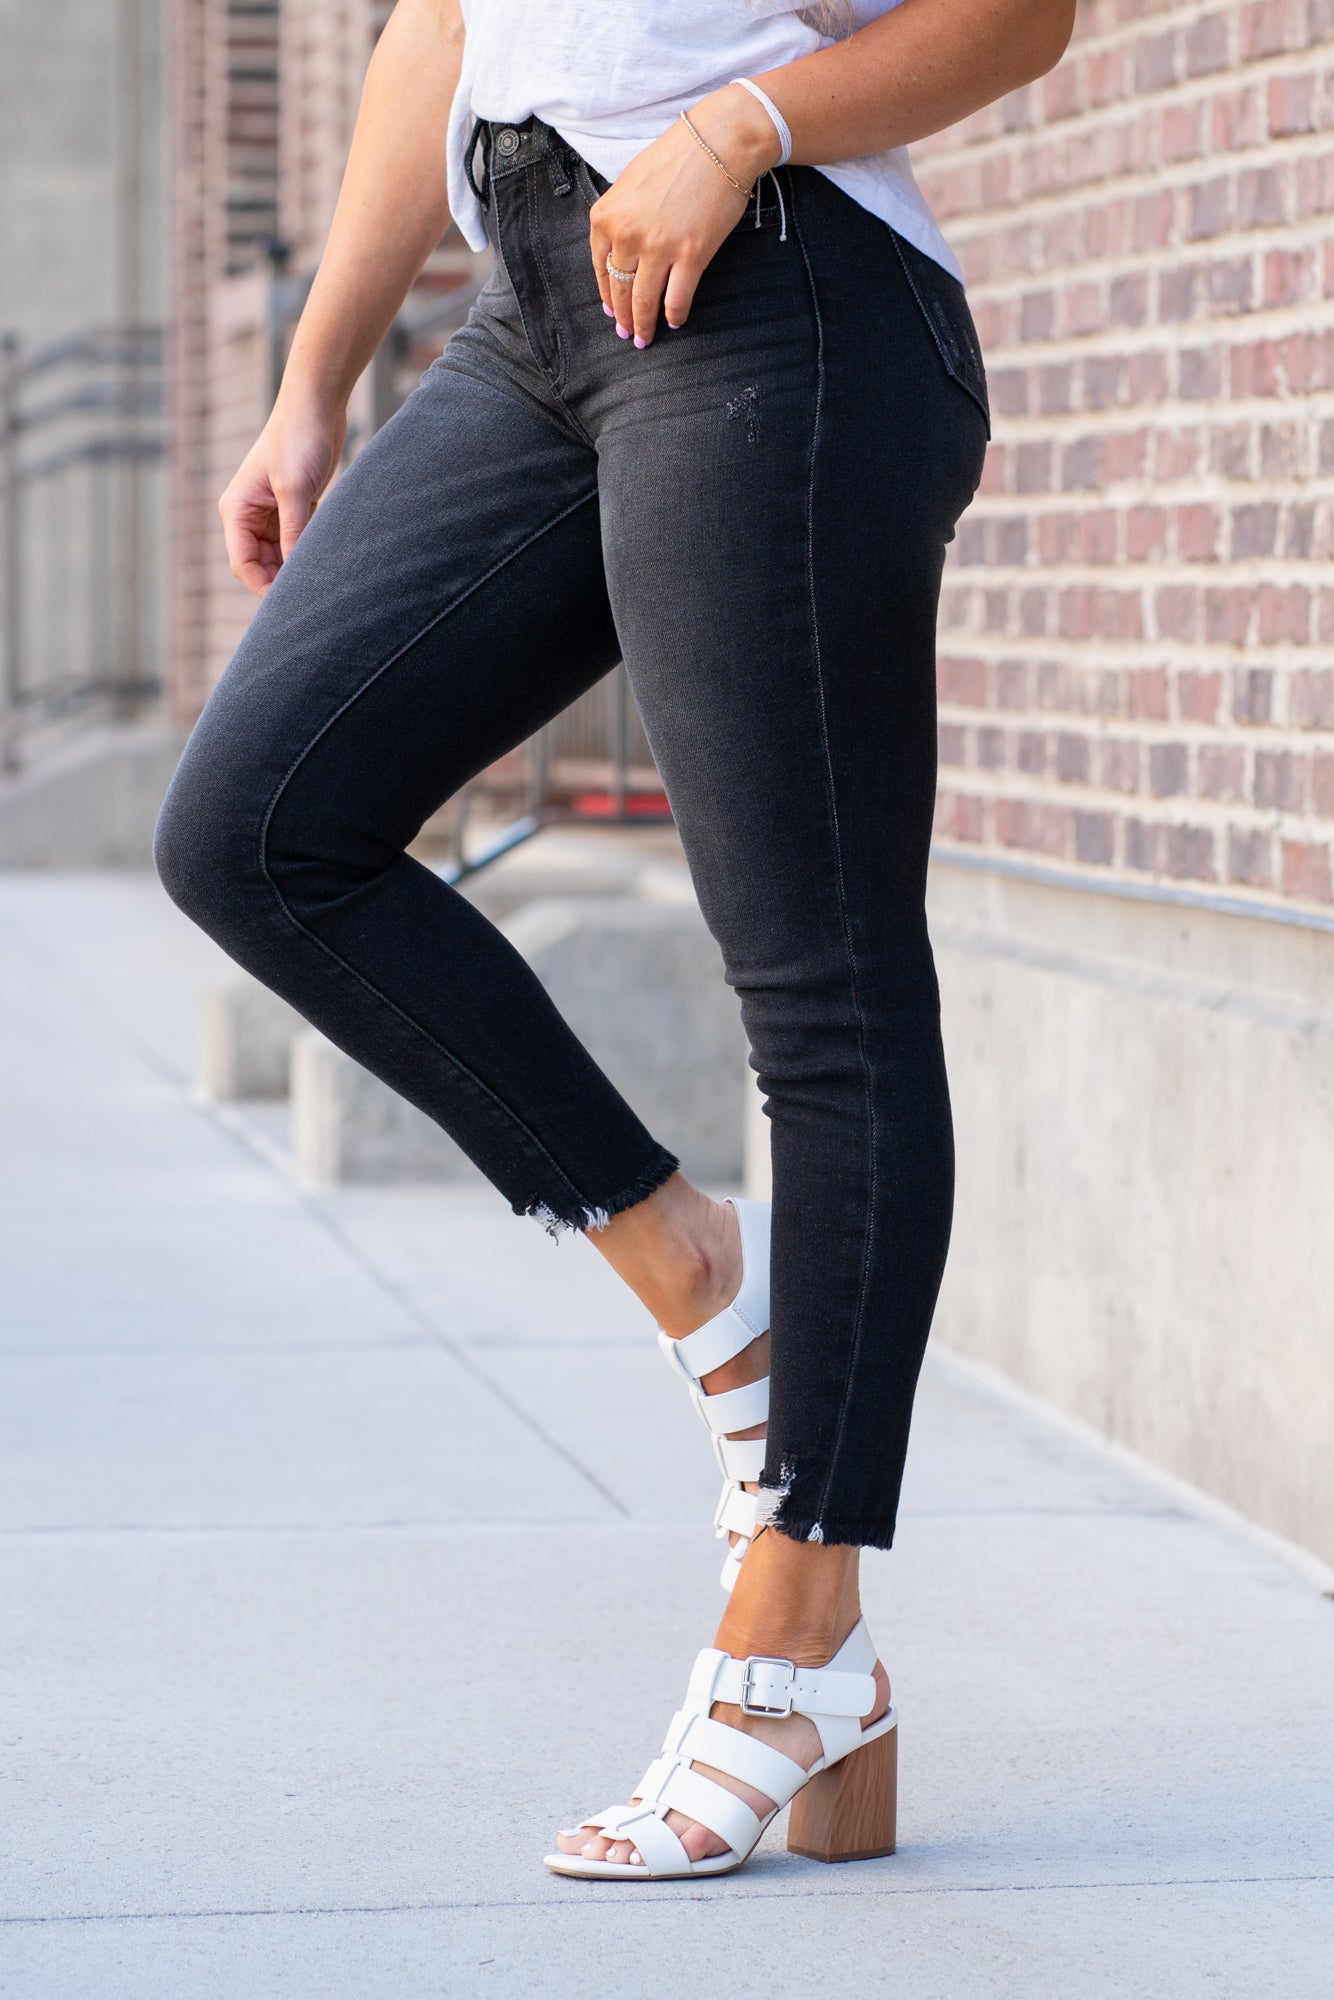 I know skinny jeans are out (funny to see today's top post being from  another fellow skinny-jean lover). Where can I change to stay relevant  while keeping my tall boots on? Not